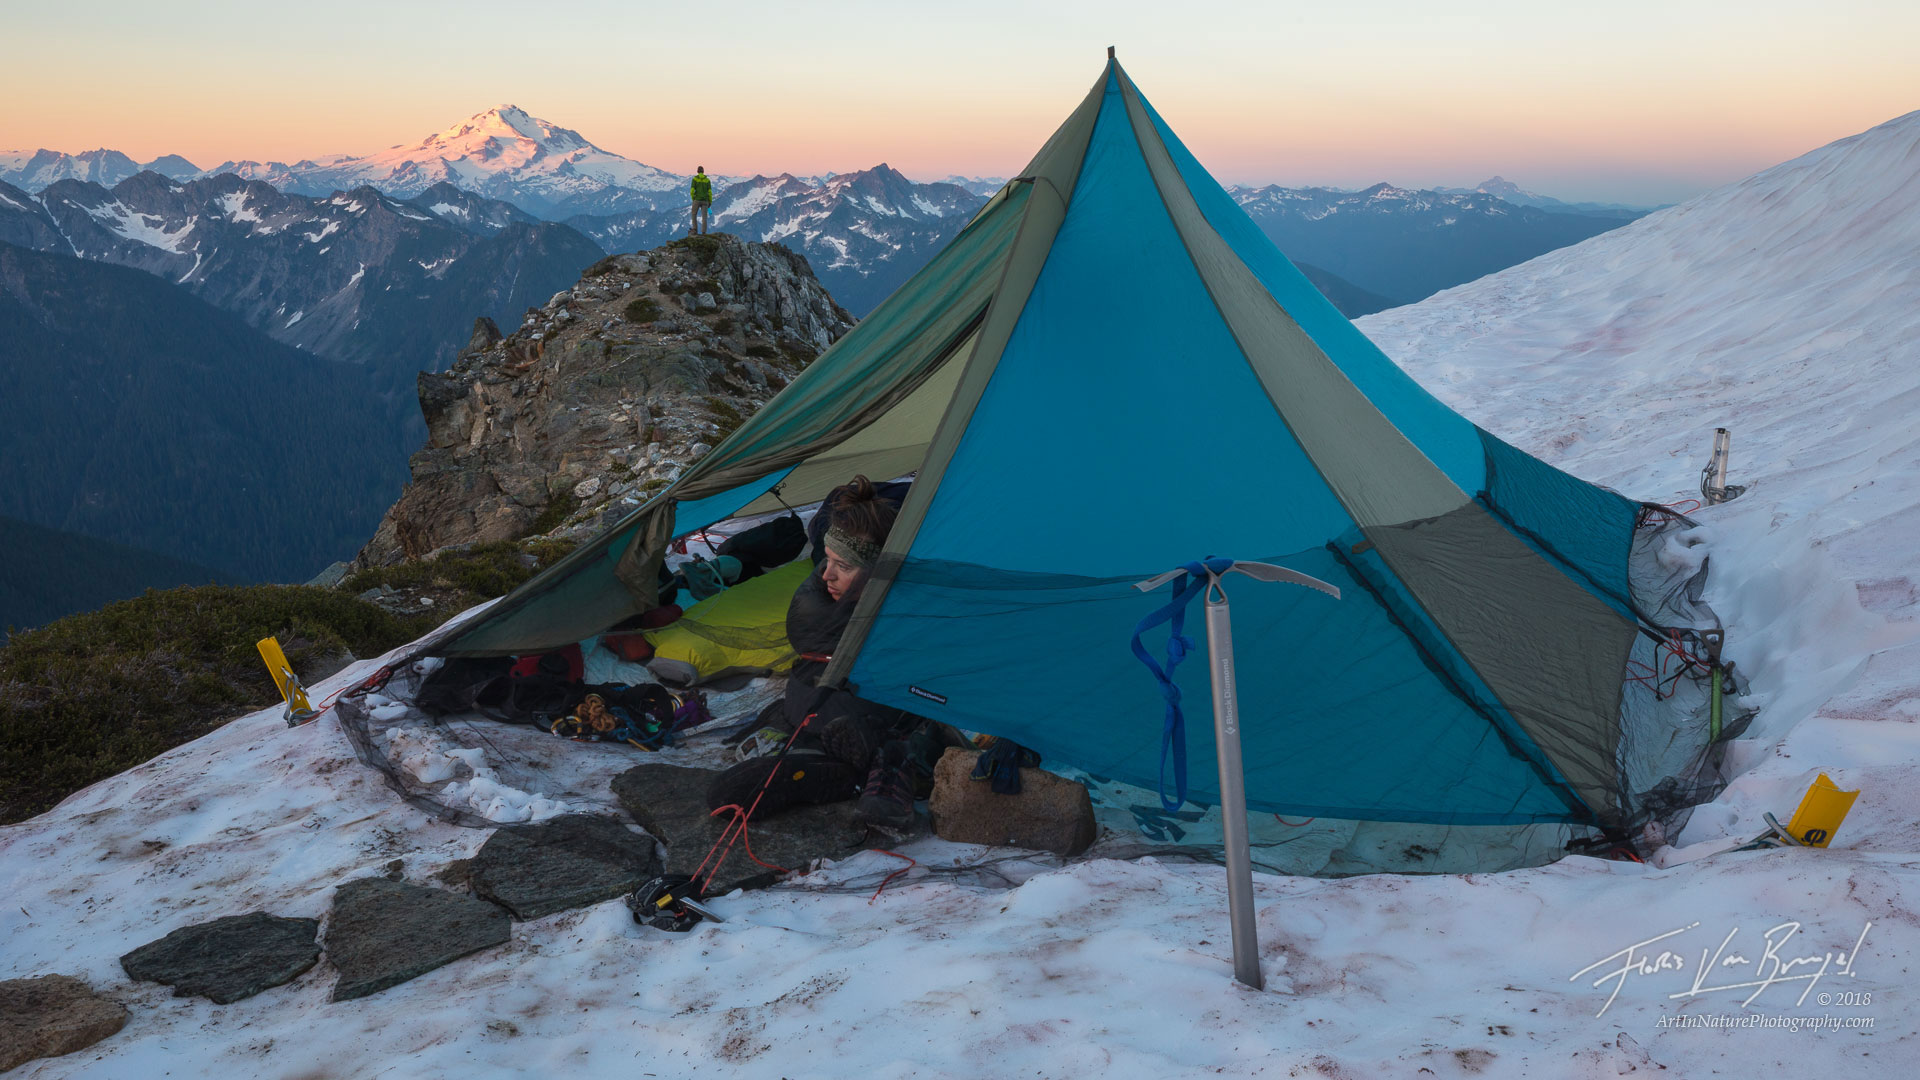 Sunrise on Itswoot Ridge, with a view of Glacier Peak. Aubrey takes in the view of the hanging glaciers on Dome Peak from her...